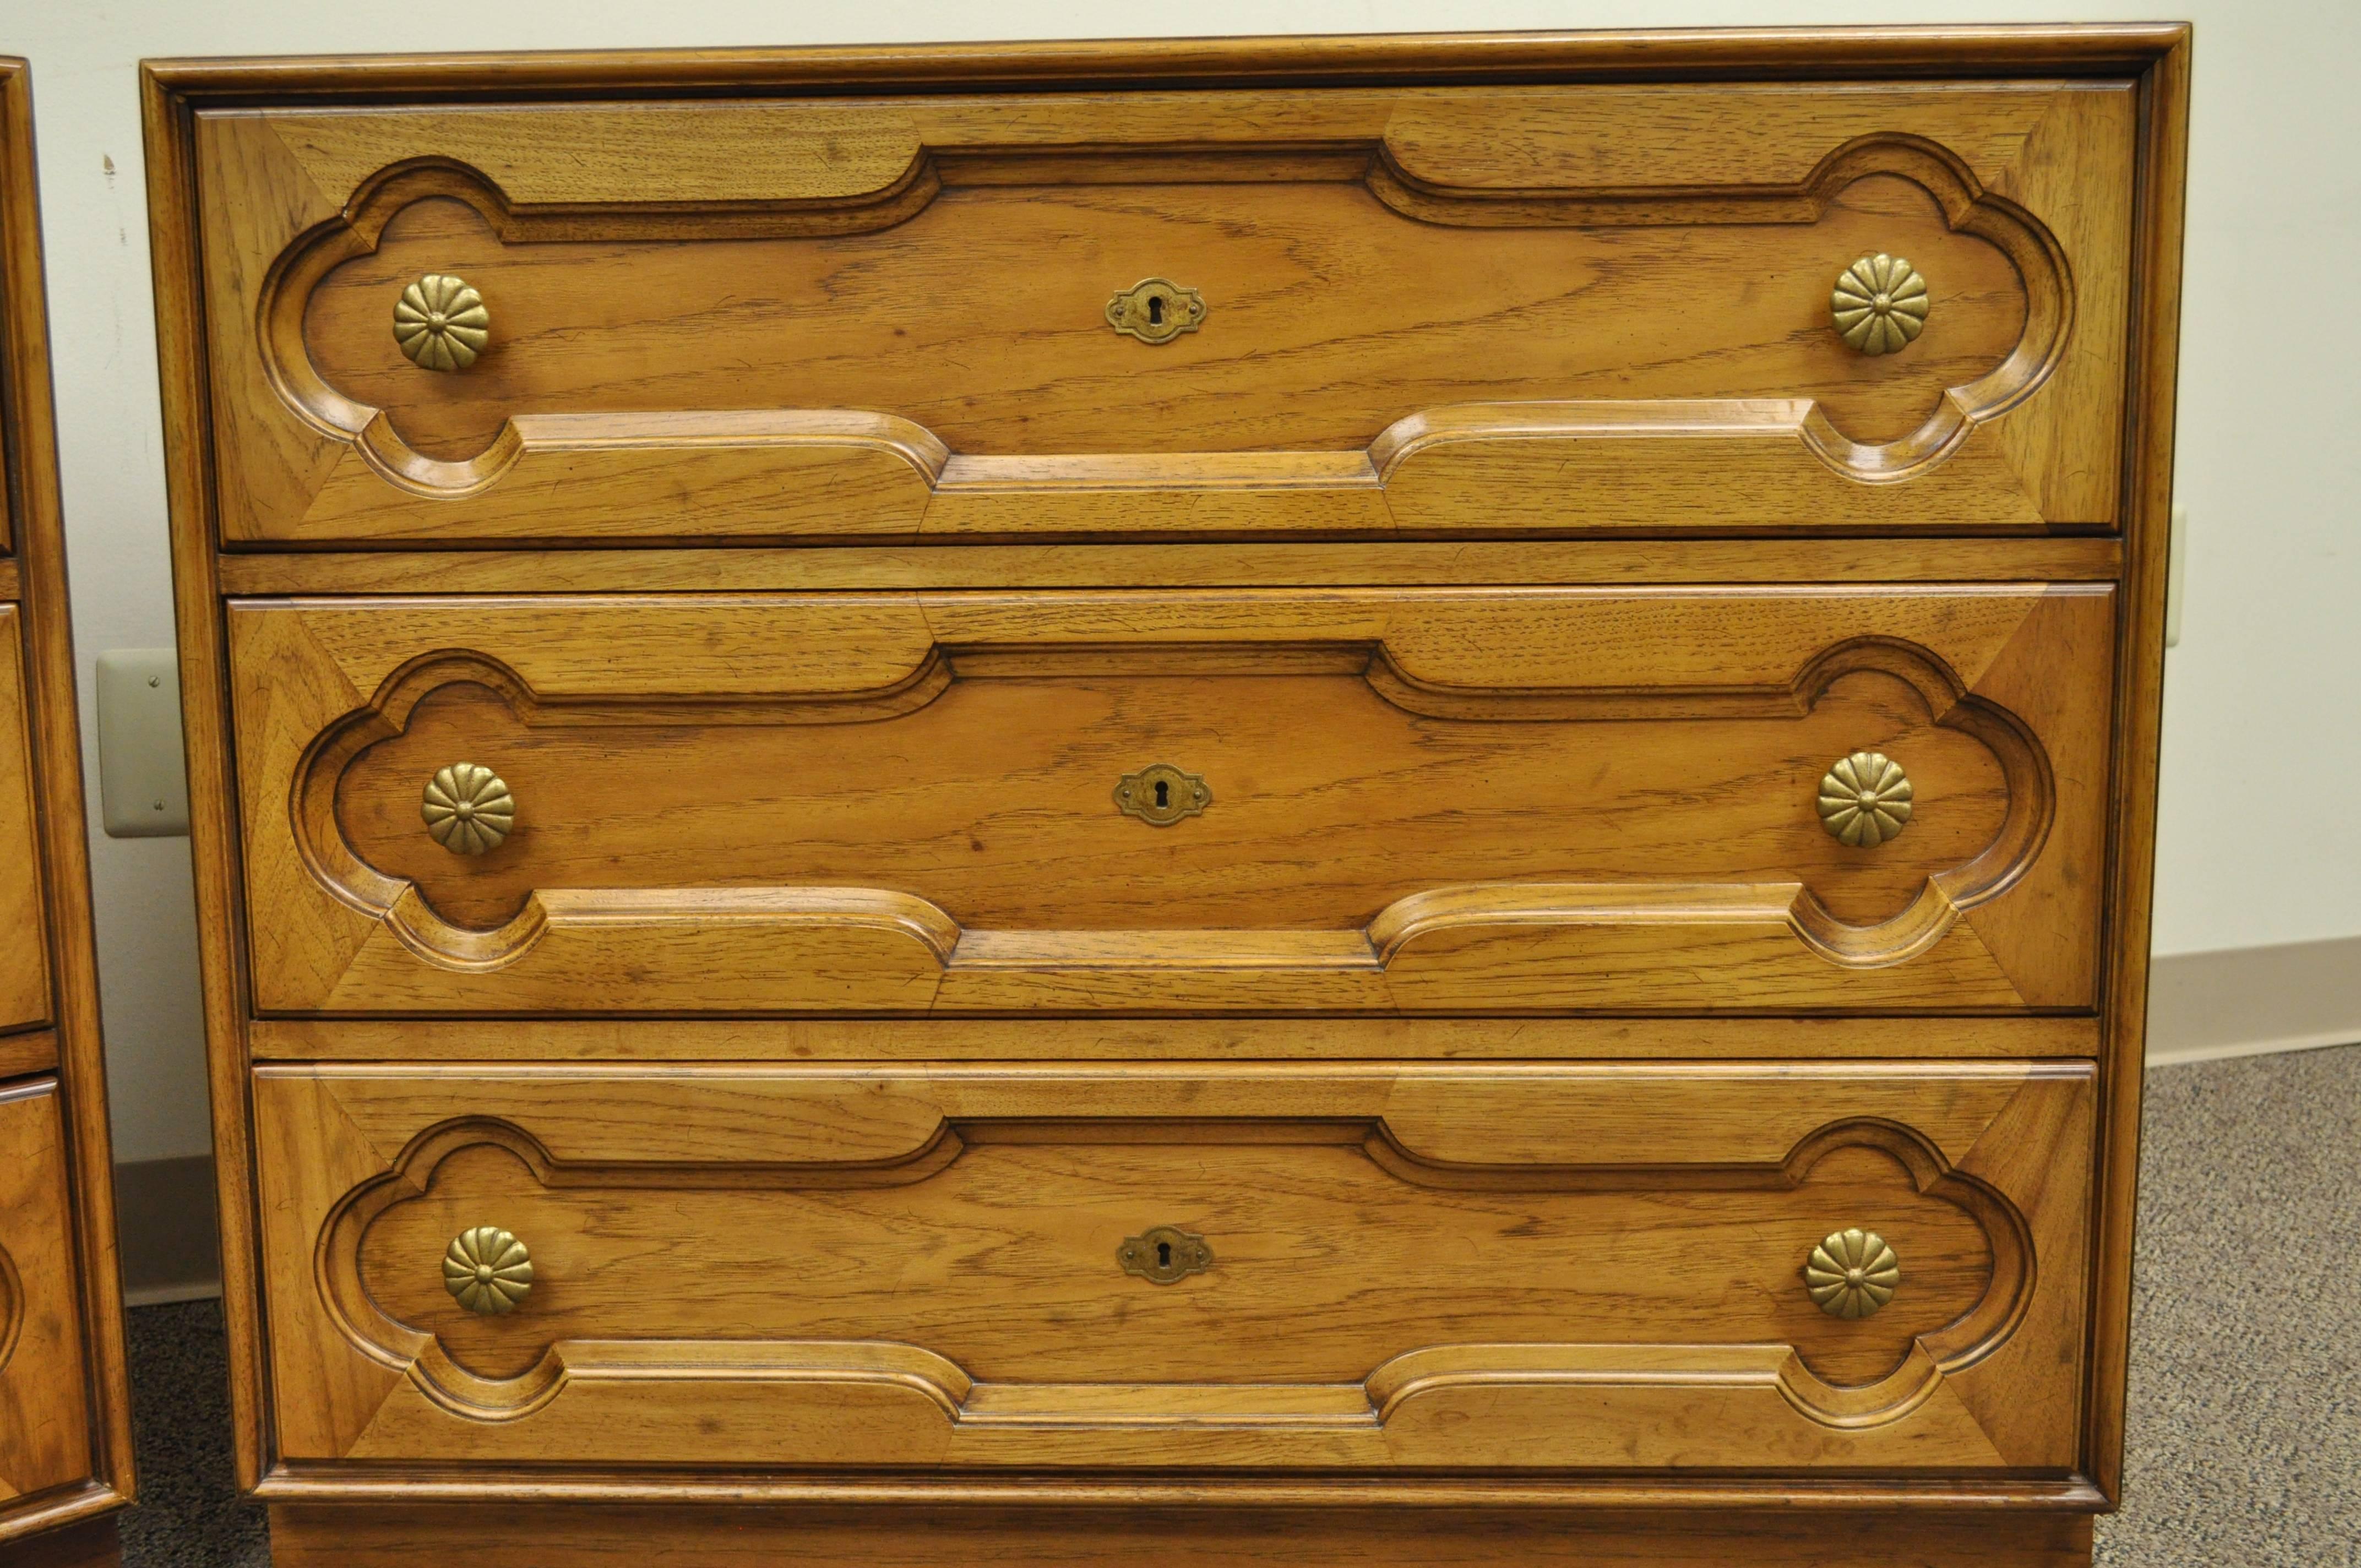 Quality pair of three-drawer commodes by Drexel Heritage. Item features solid brass hardware, three dovetail constructed drawers each, carved drawer fronts and clean lines. Style and quality is very similar to that of Dorothy Draper. Designer is